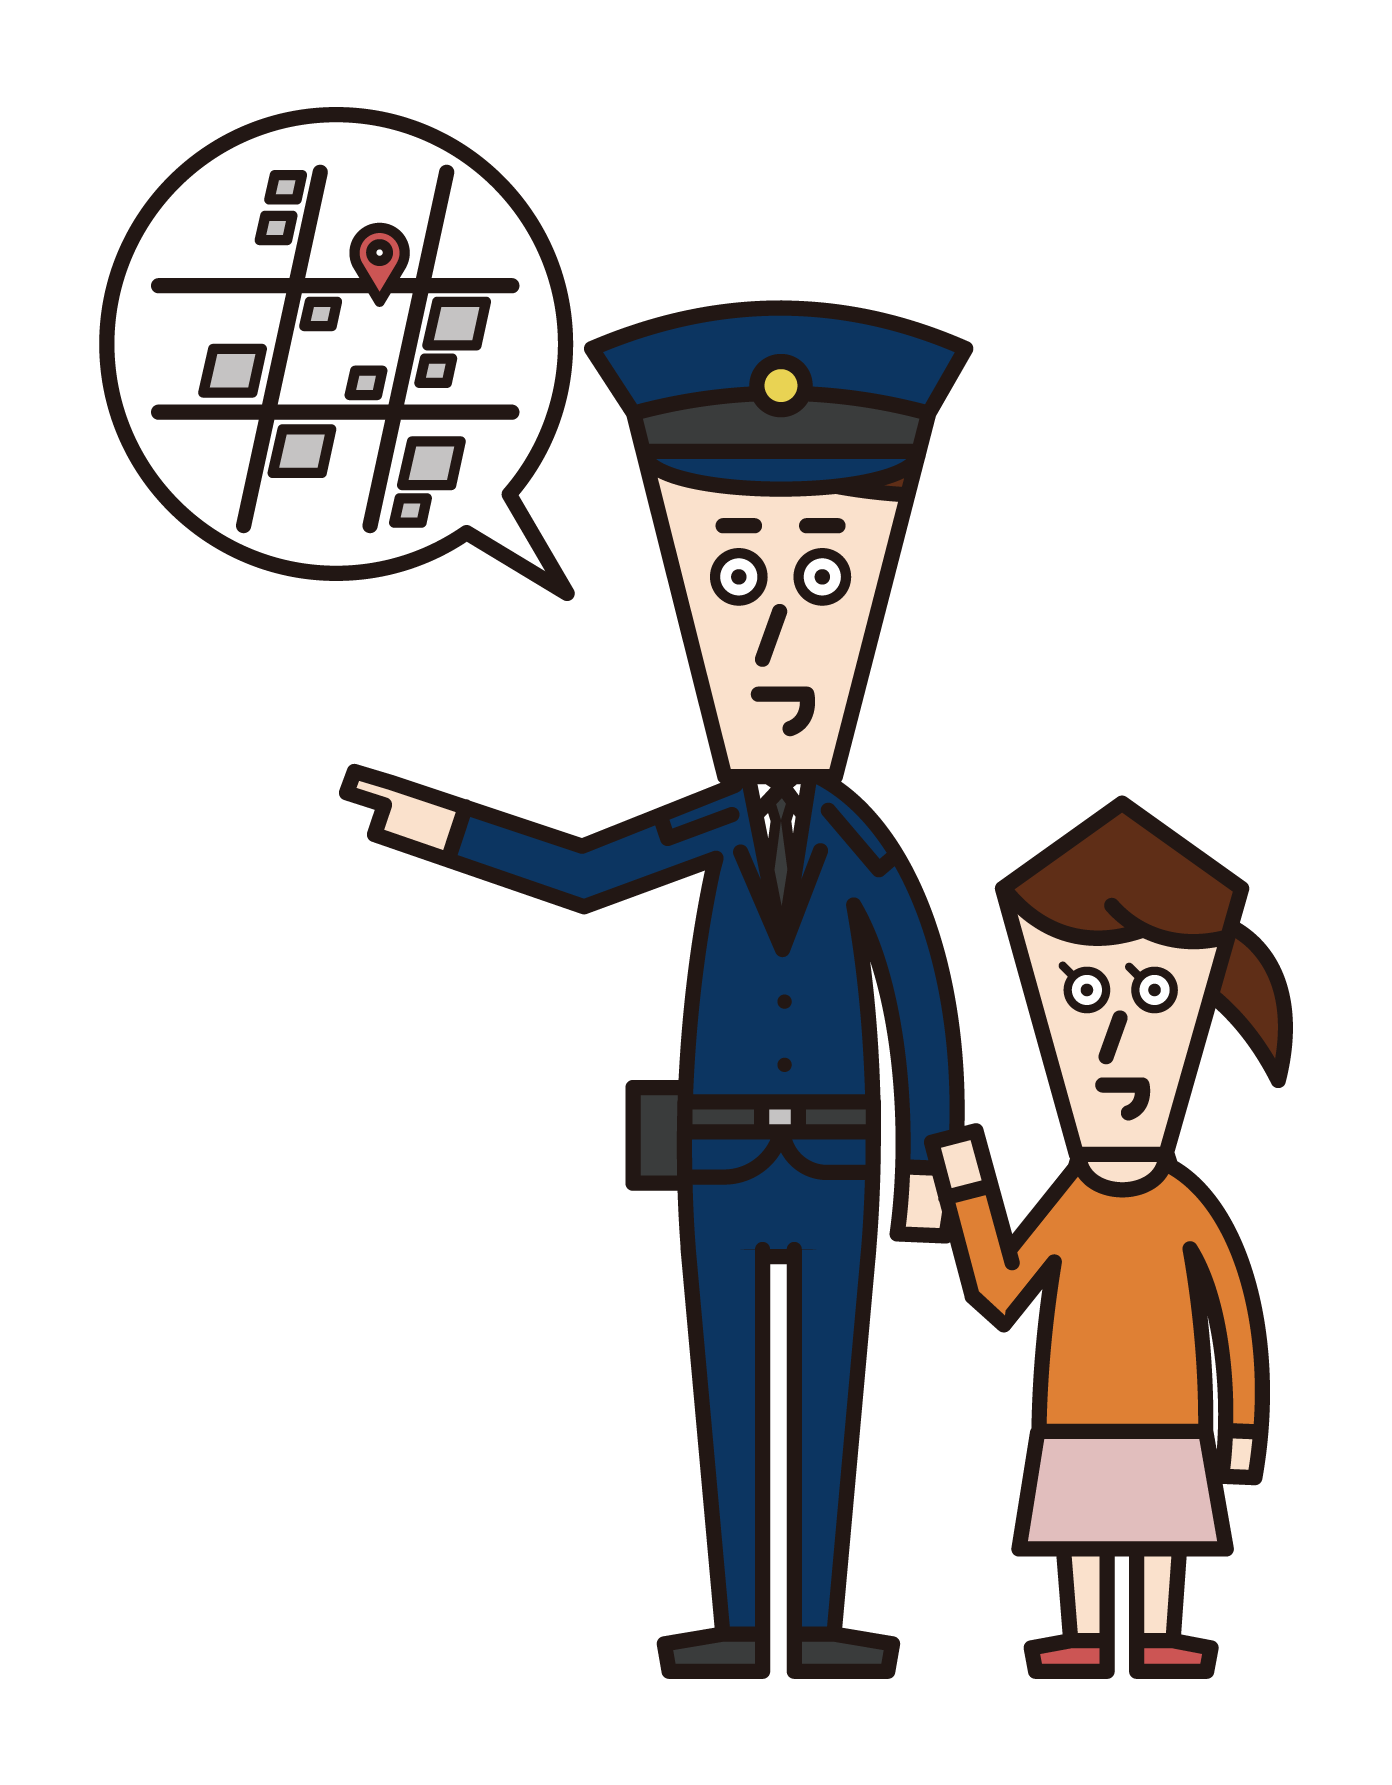 Illustration of a child (a boy) asking a police officer for directions